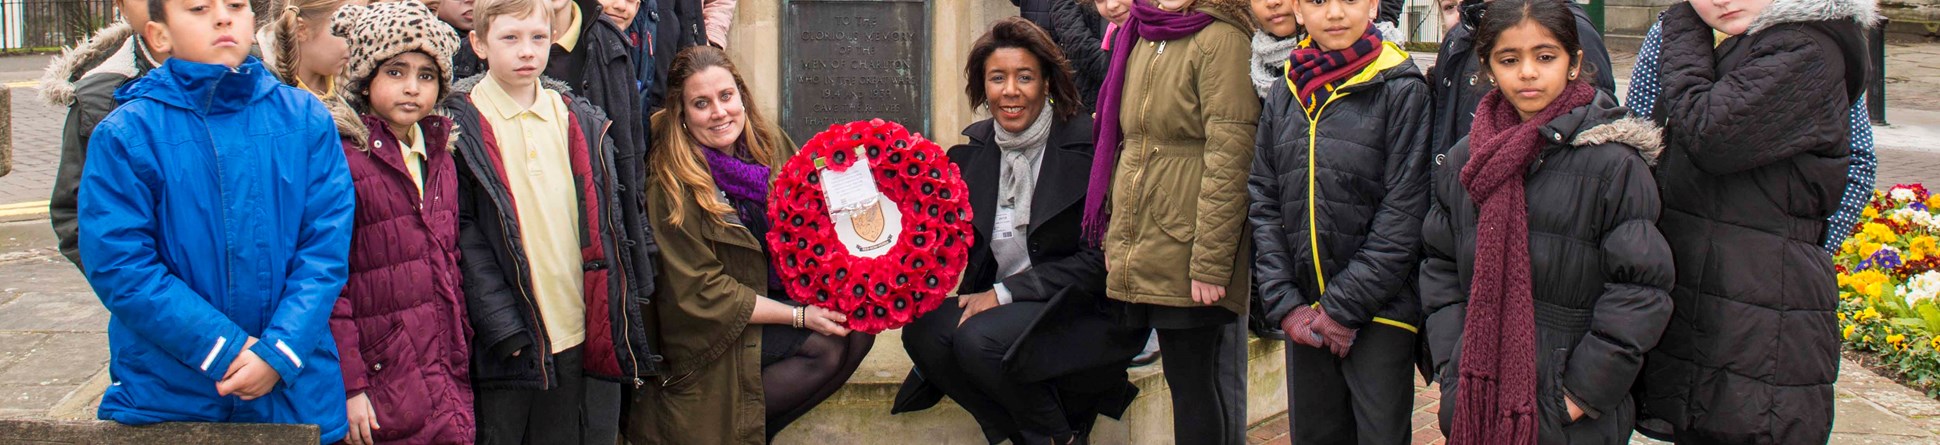 Children from Charlton Manor Primary School, Tiva Montalbano First World War Programme Manager at Historic England and Cllr Denise Scott-Mcdonald gather at the war memorial to lay a wreath.